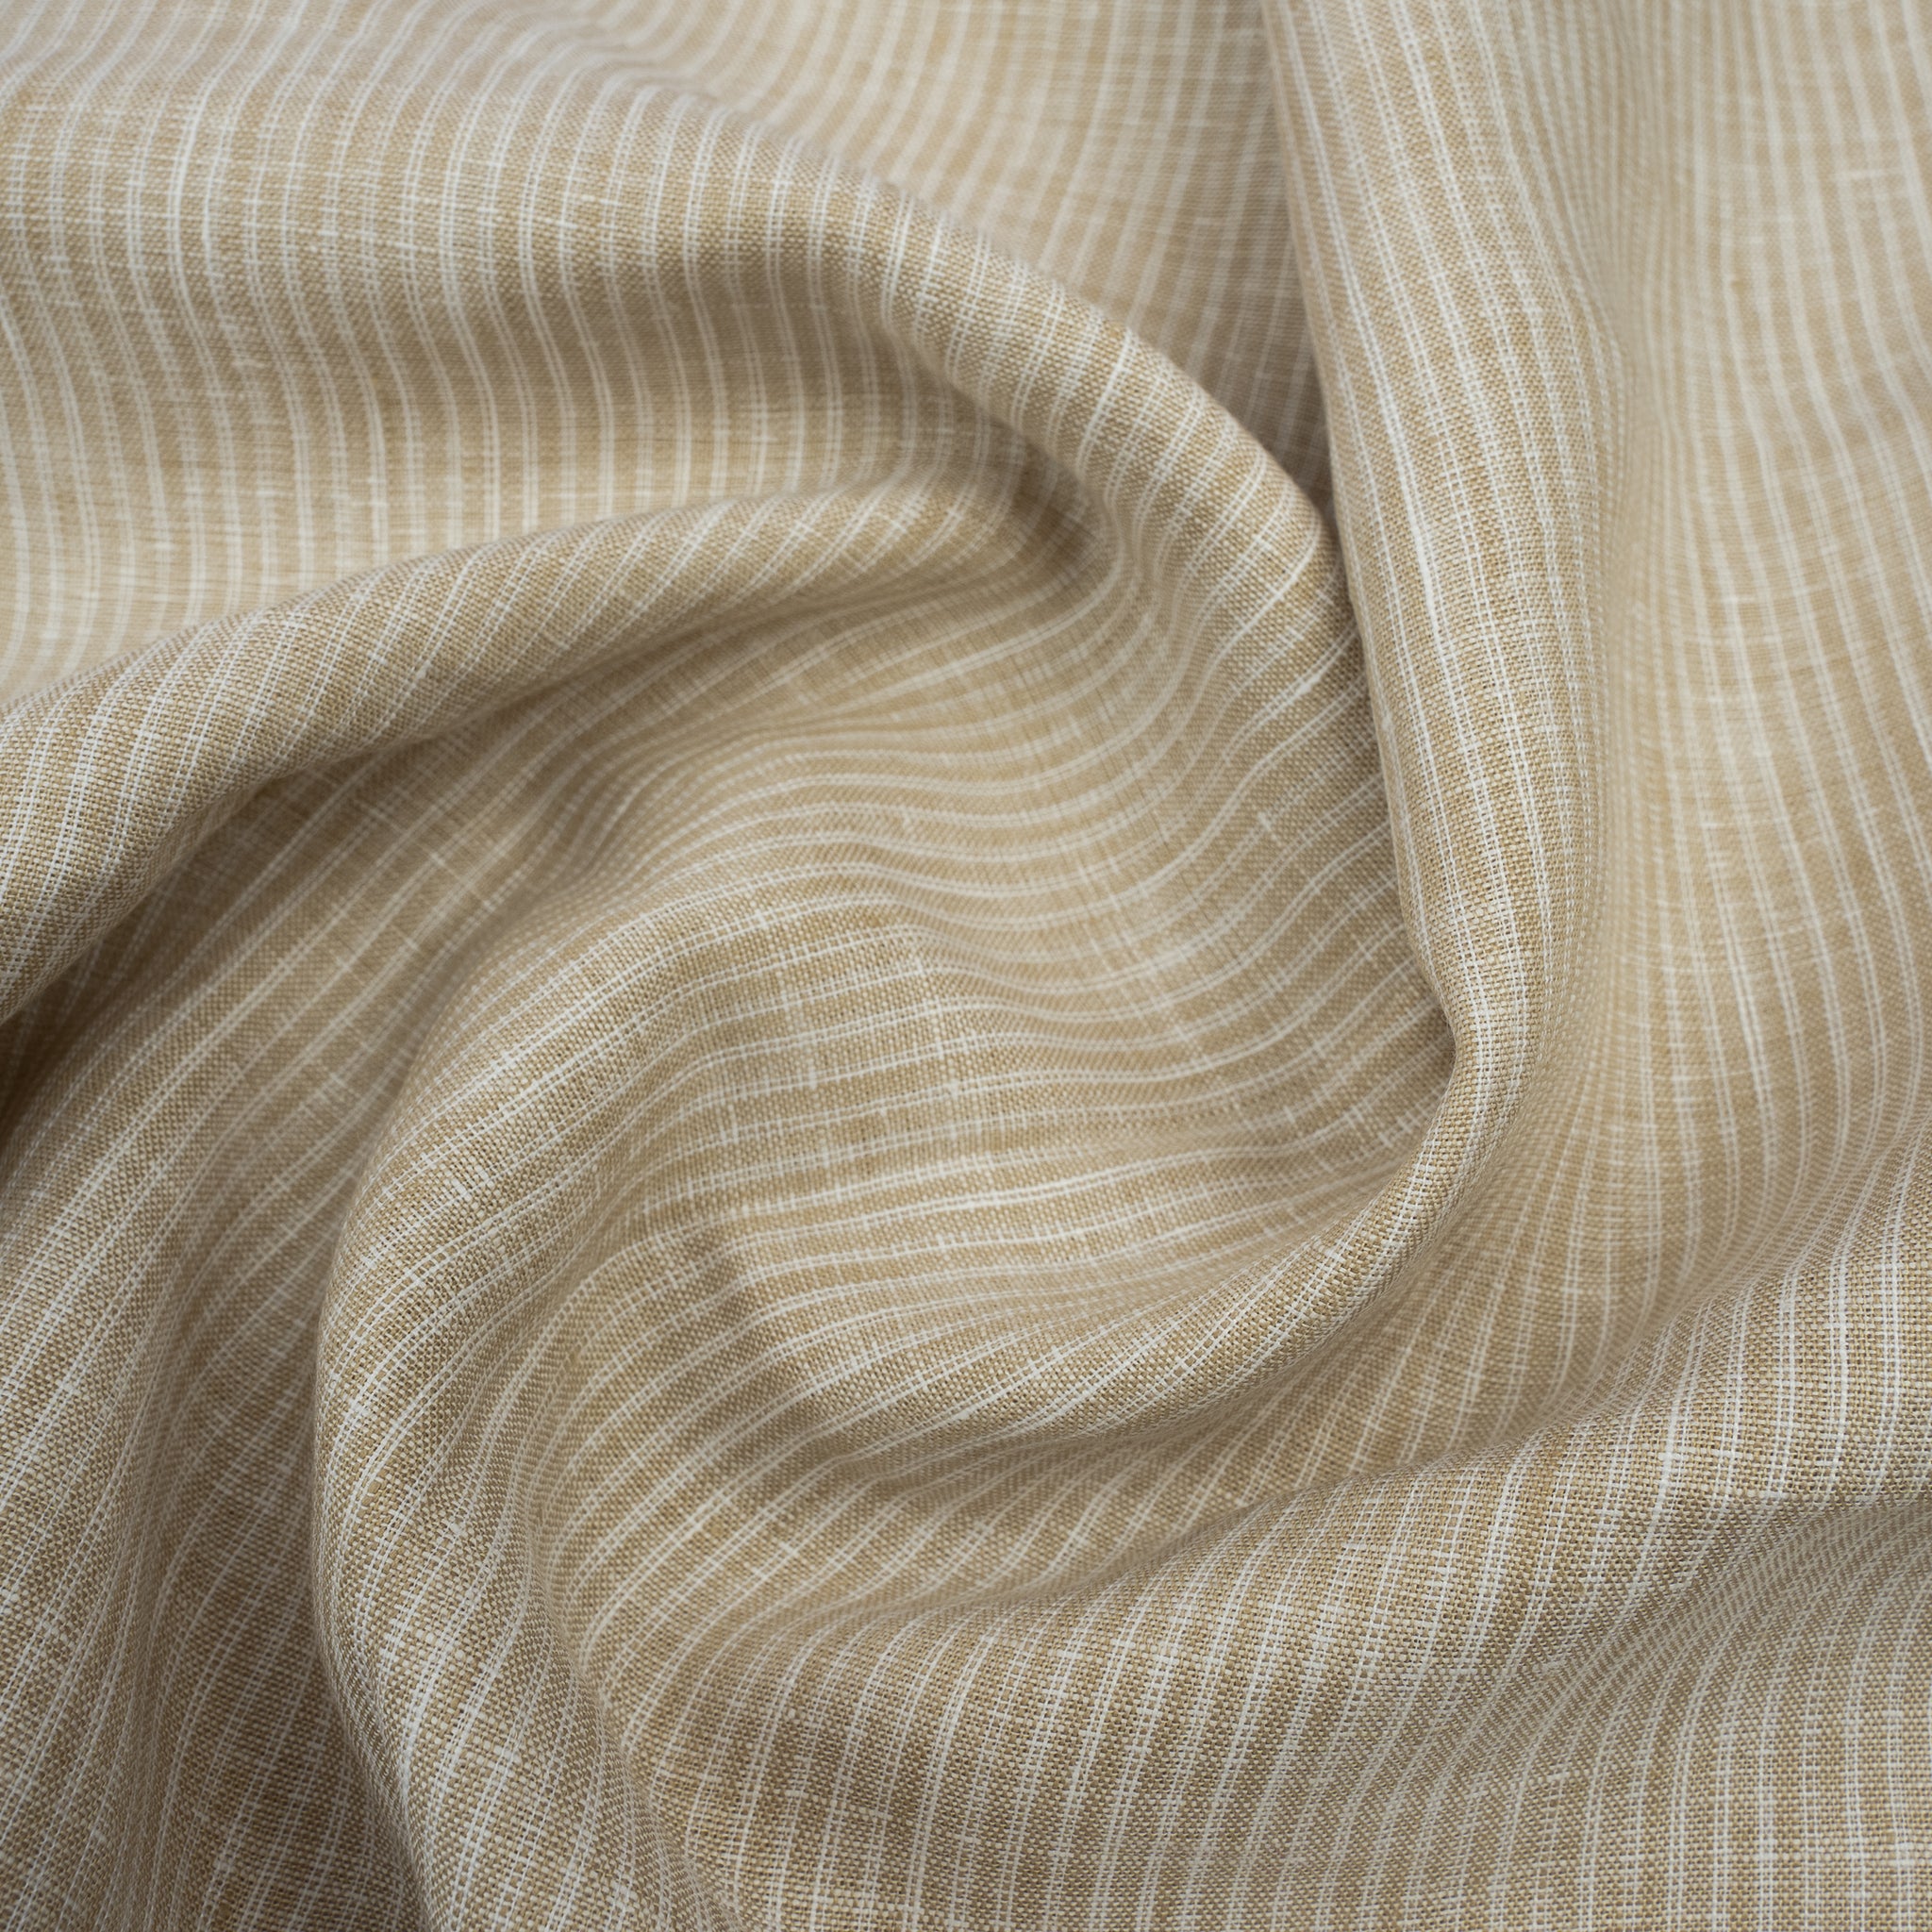 100% Linen, Yarn Dyed, Plain,Brown And White, Men And Women, Unstitched Shirting Or Top Fabric